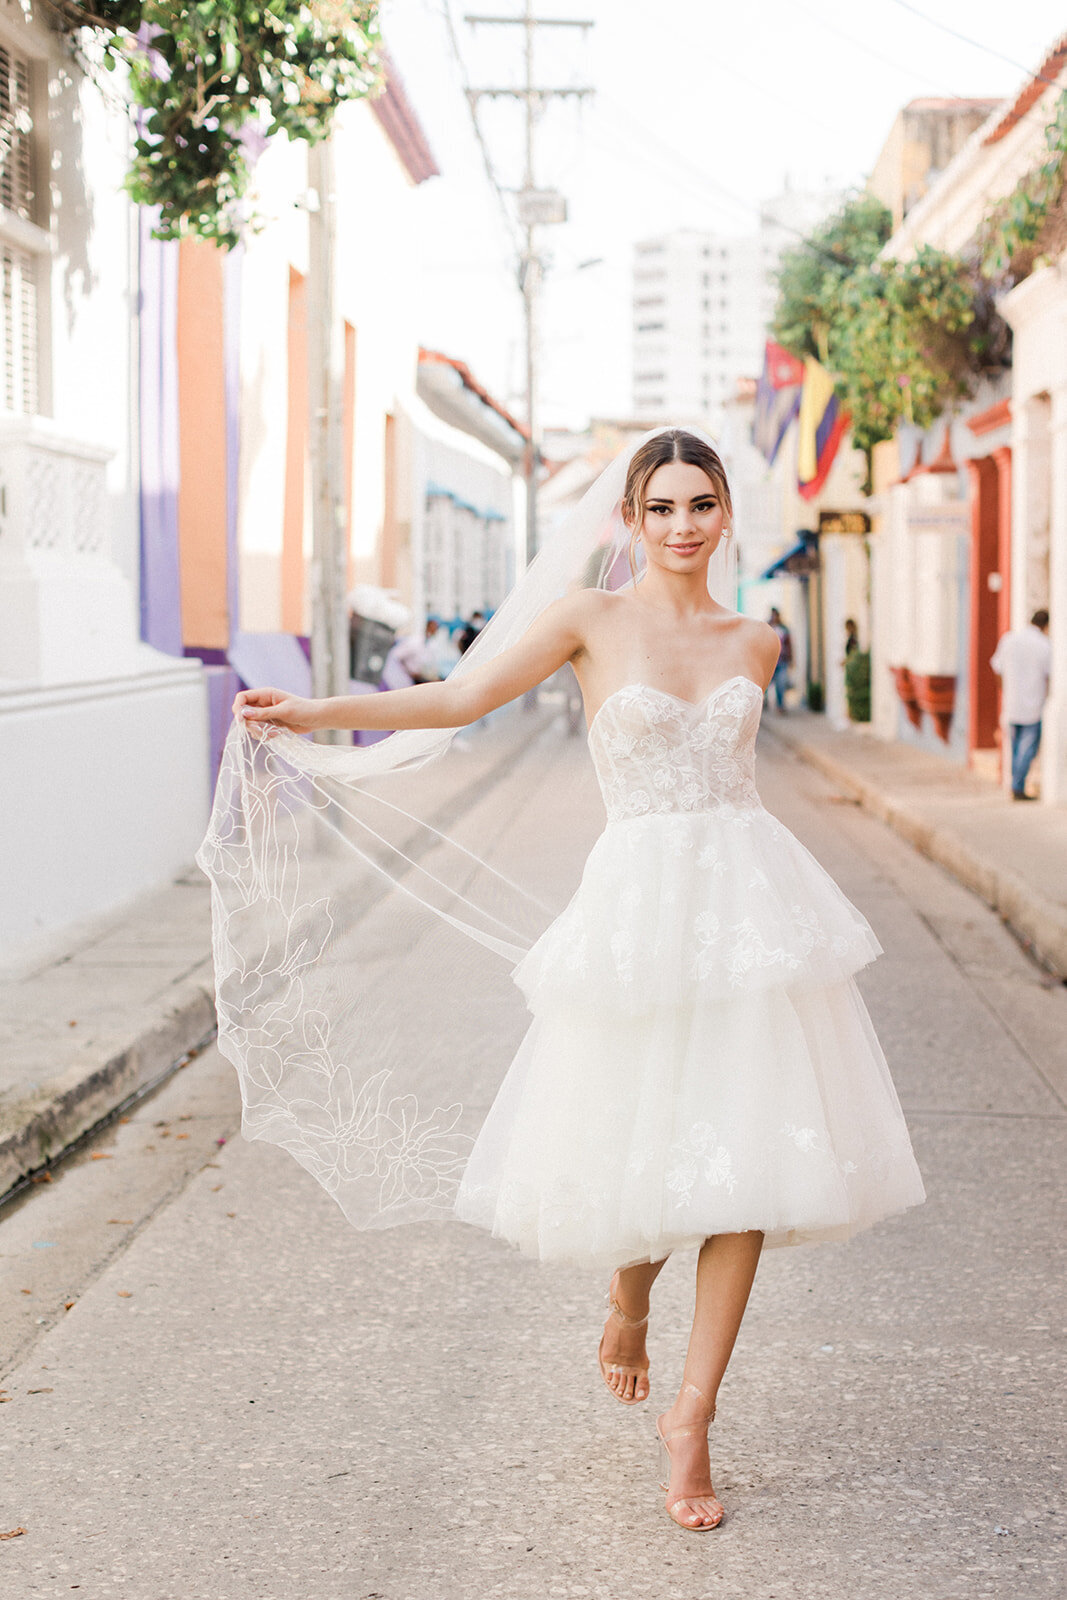 Watters Wedaways Sofitel Cartagena Colombia-Valorie Darling Photography-DF1A2885